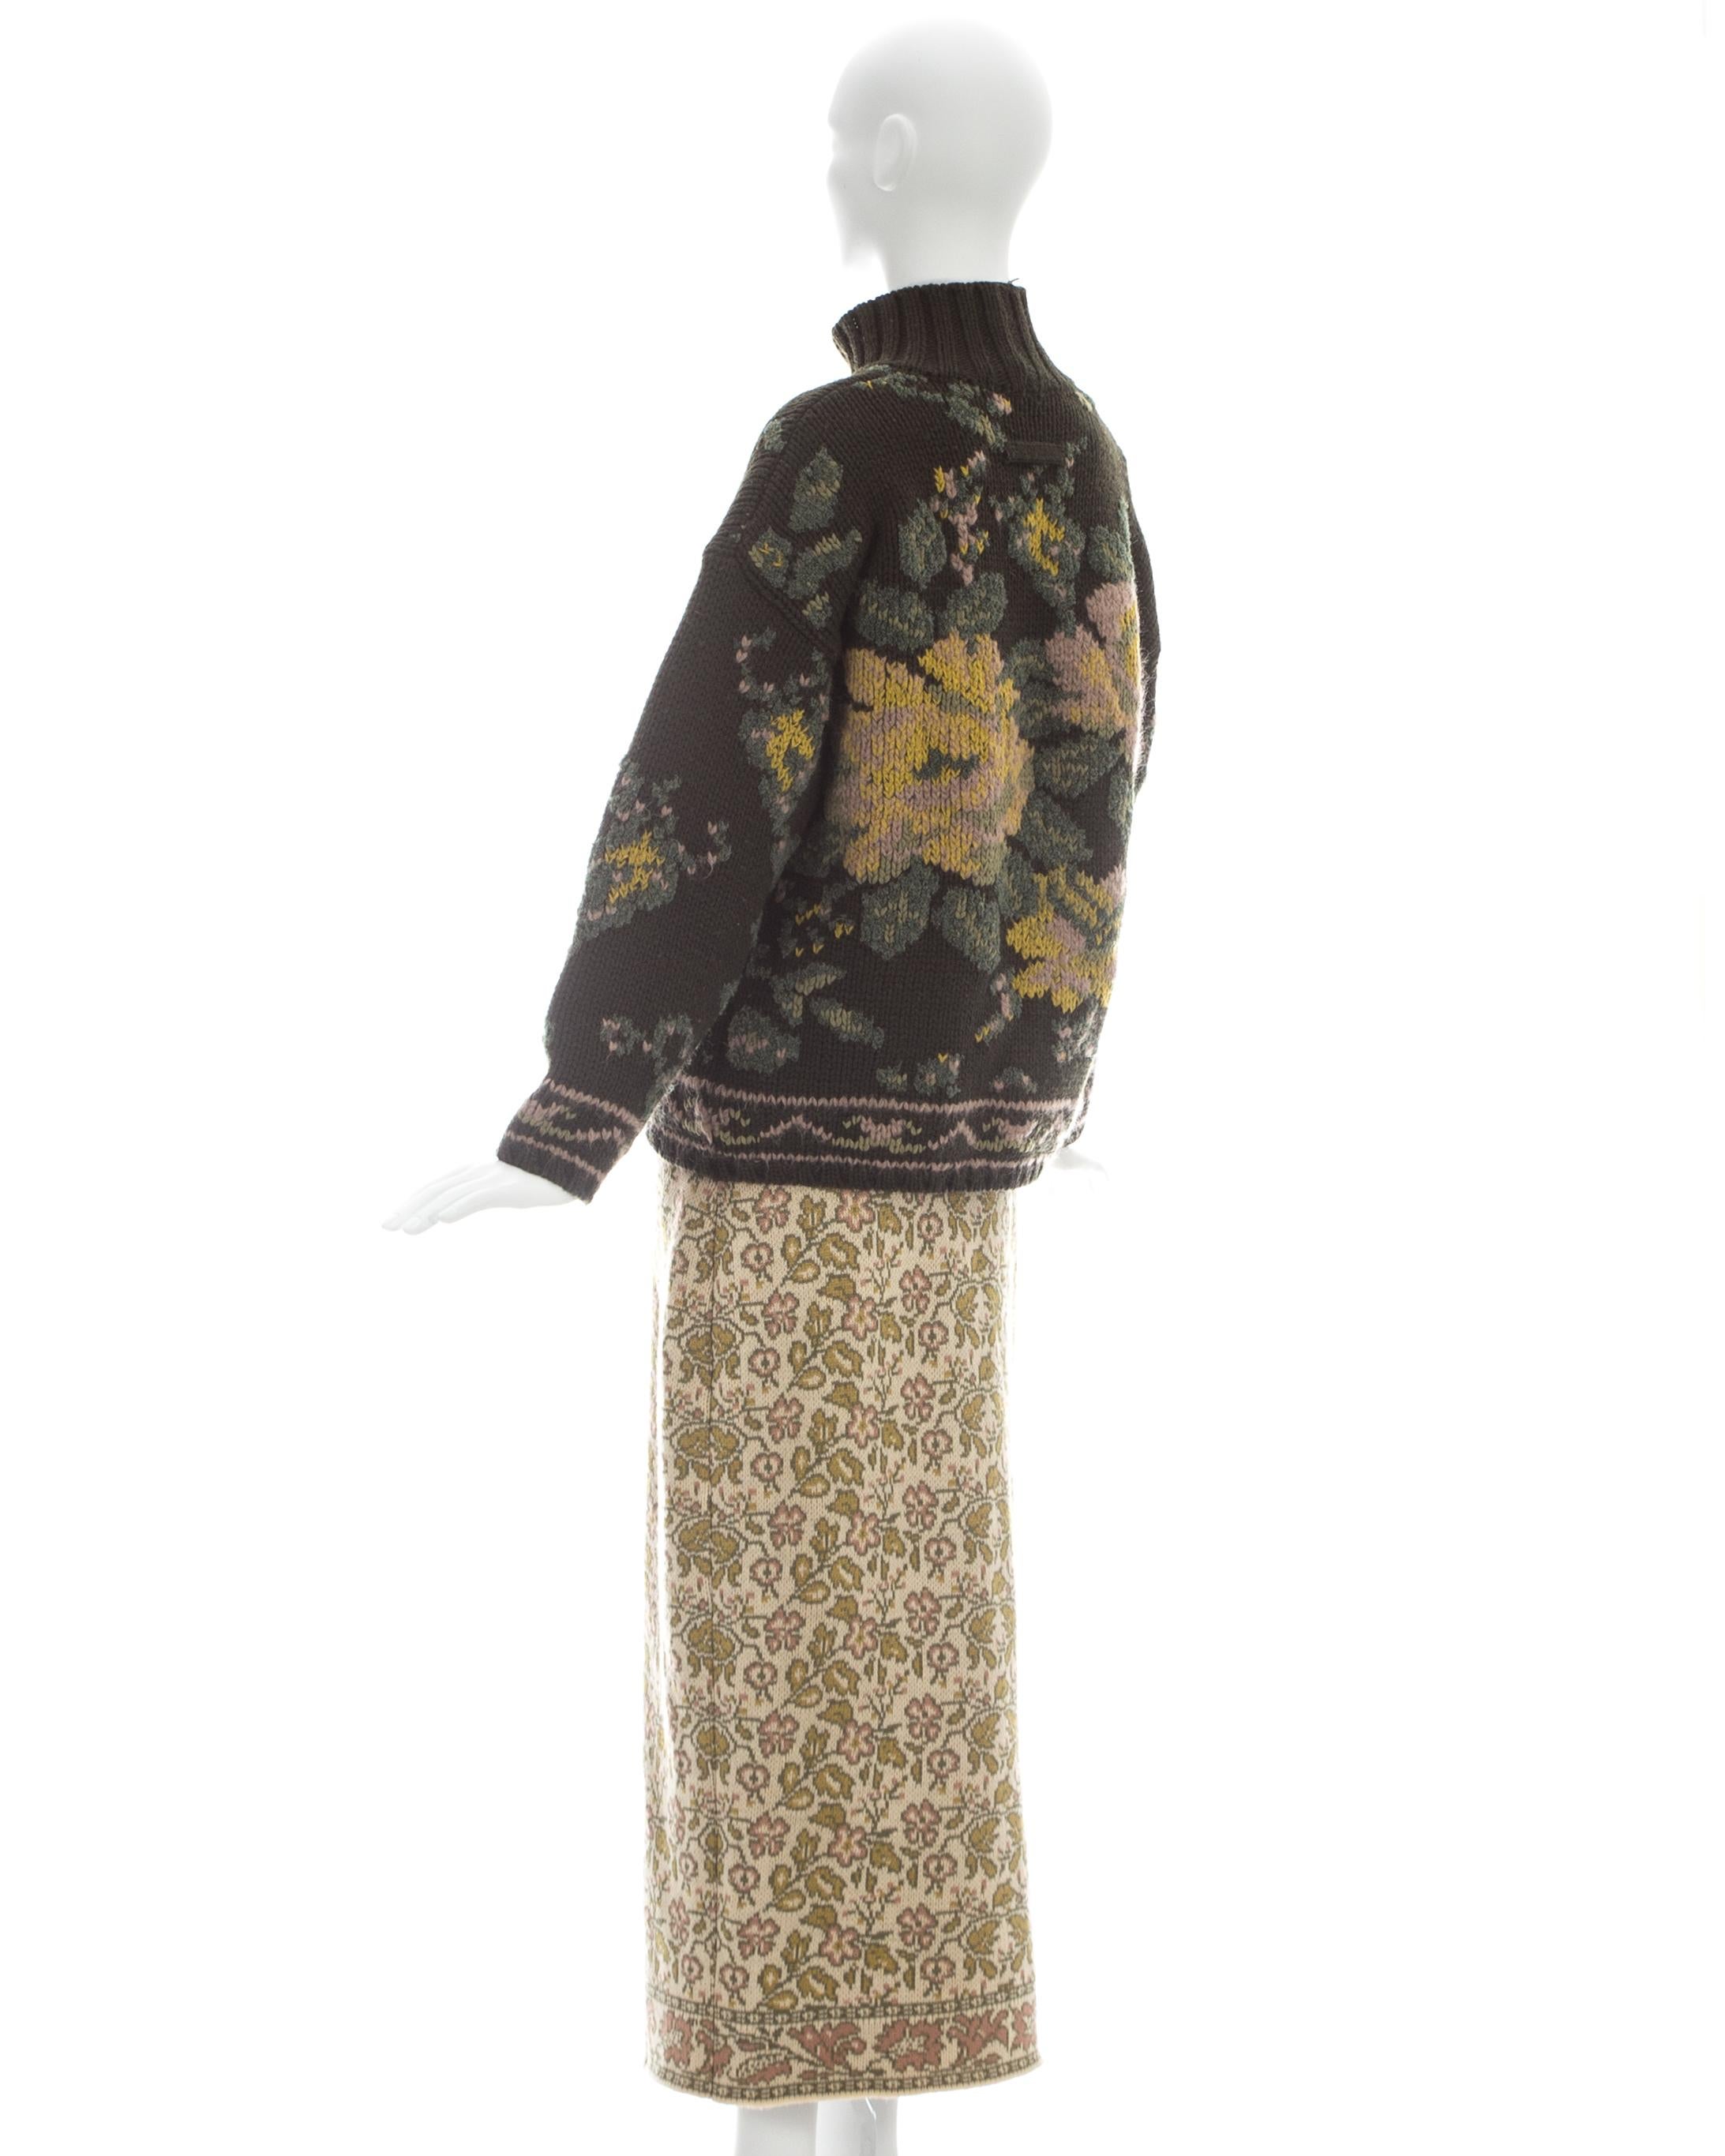 Jean Paul Gaultier knitted wool floral tapestry sweater and skirt set, fw 1984 For Sale 1